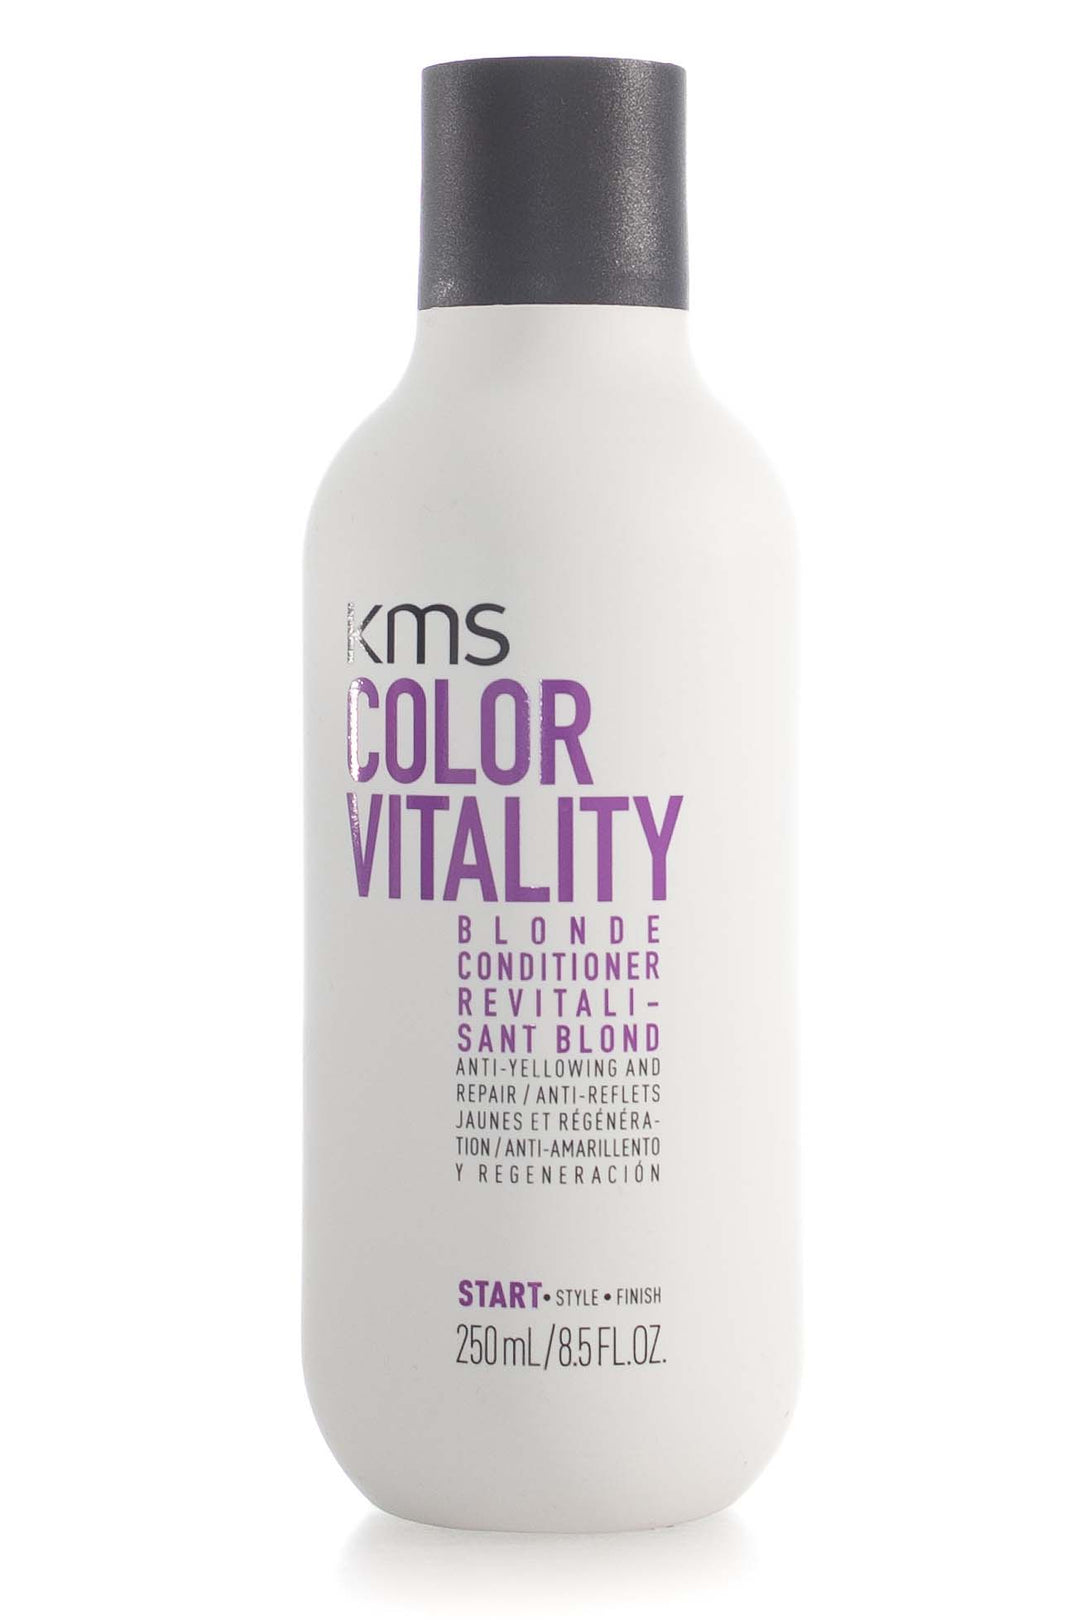 kms-color-vitality-blonde-conditioner-250ml